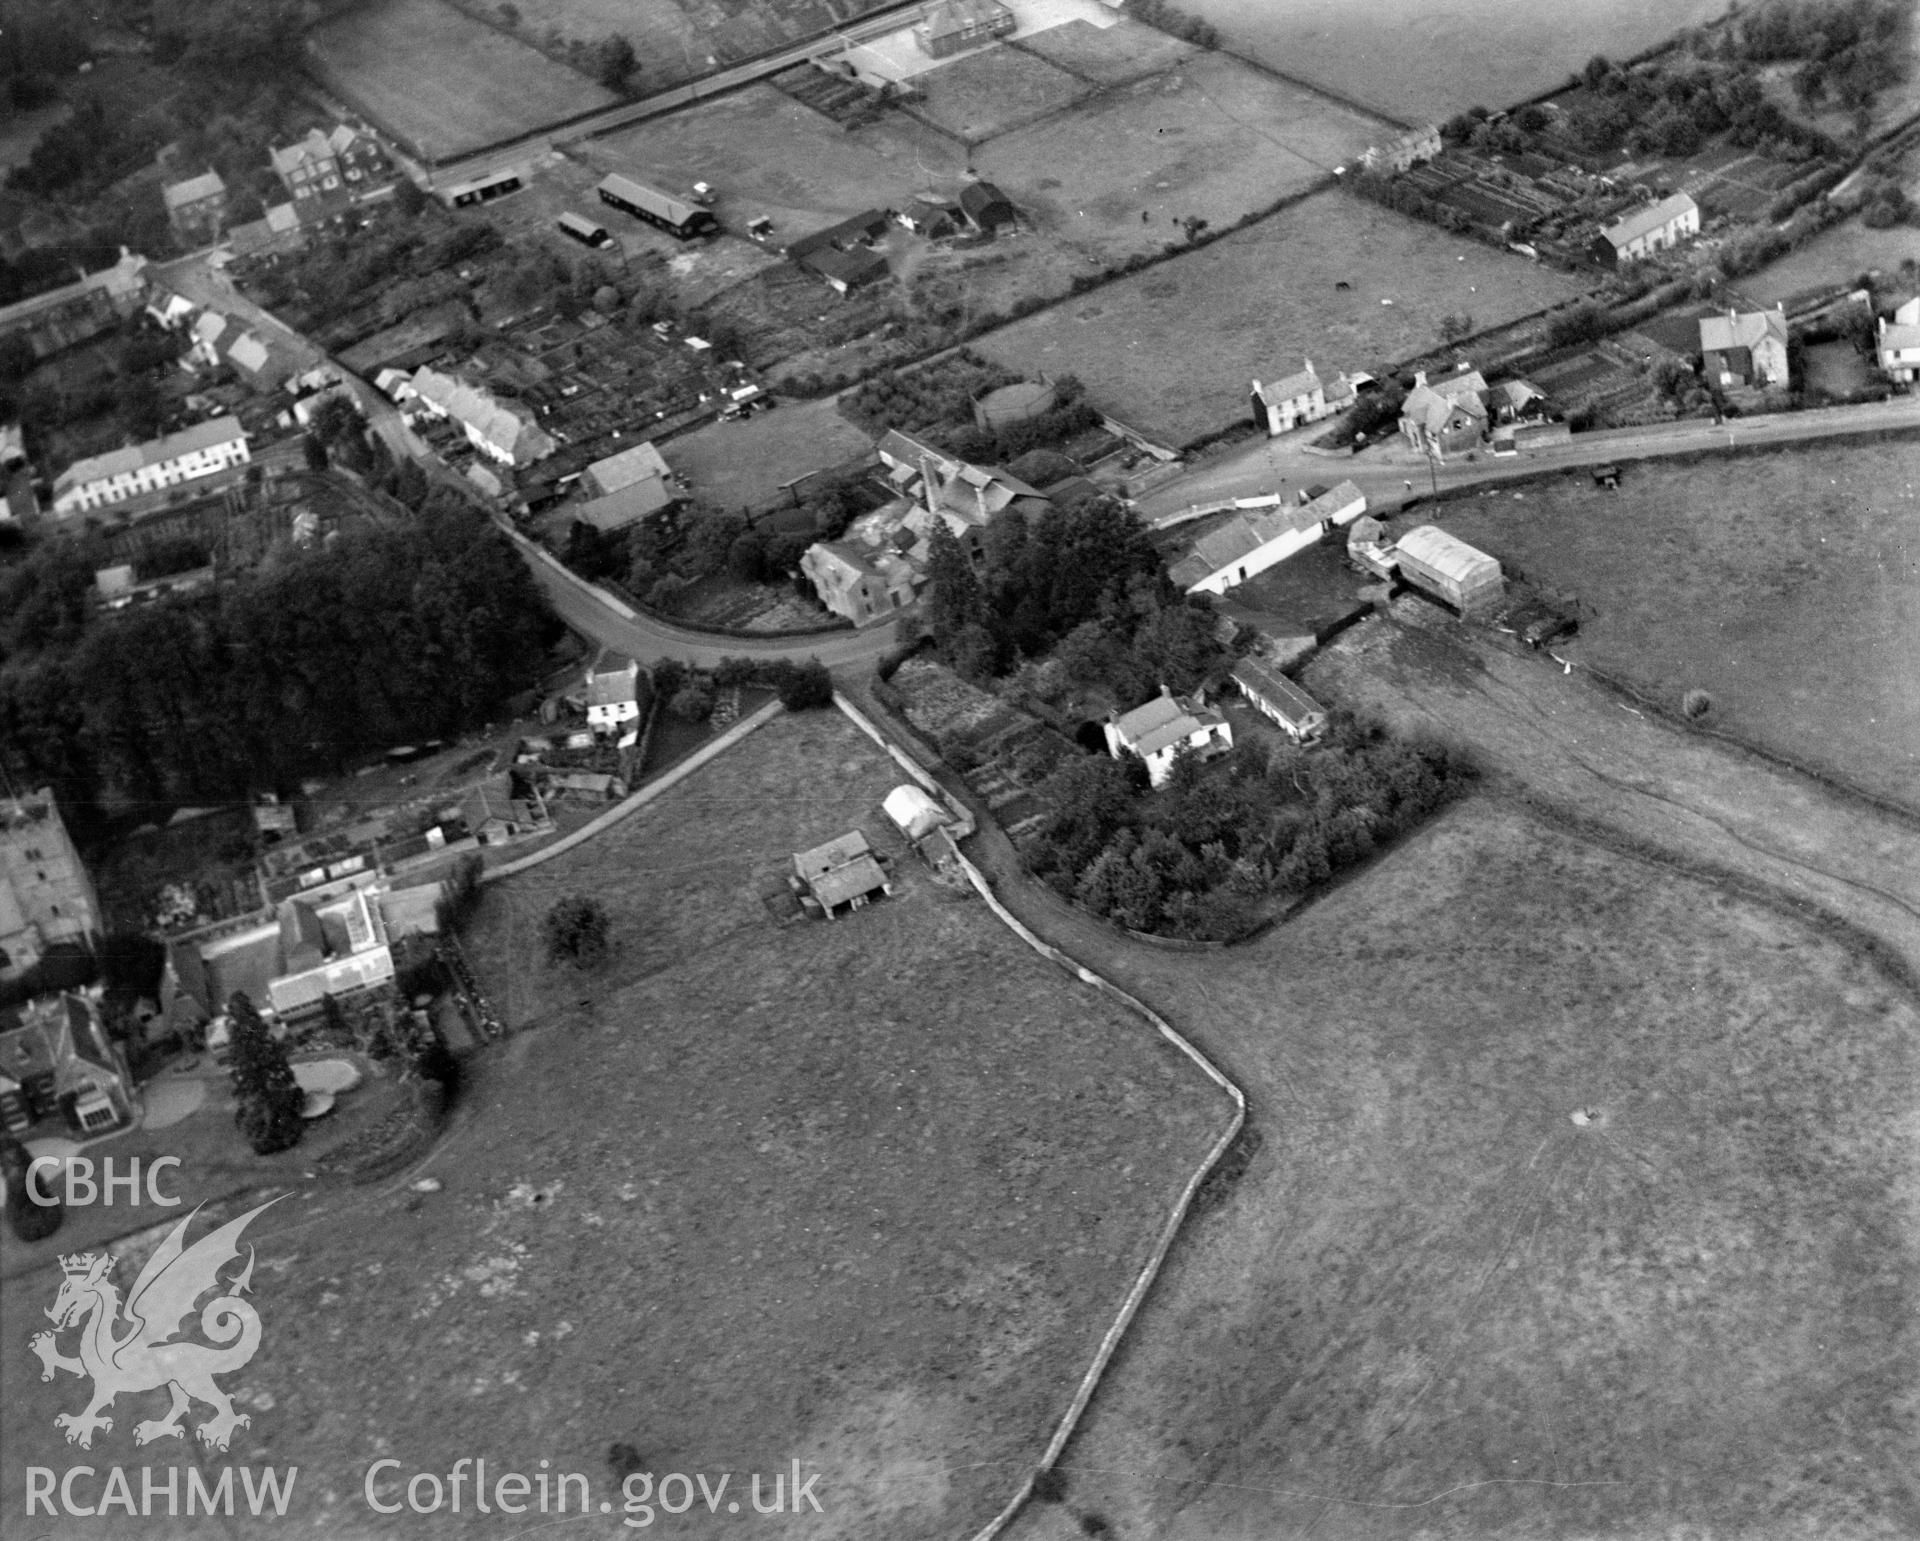 View of the Four Ash Street and Chepstow Road area of Usk showing the Greyhound Inn, Usk Dairy Farm and gasworks. Oblique aerial photograph, 5?x4? BW glass plate.